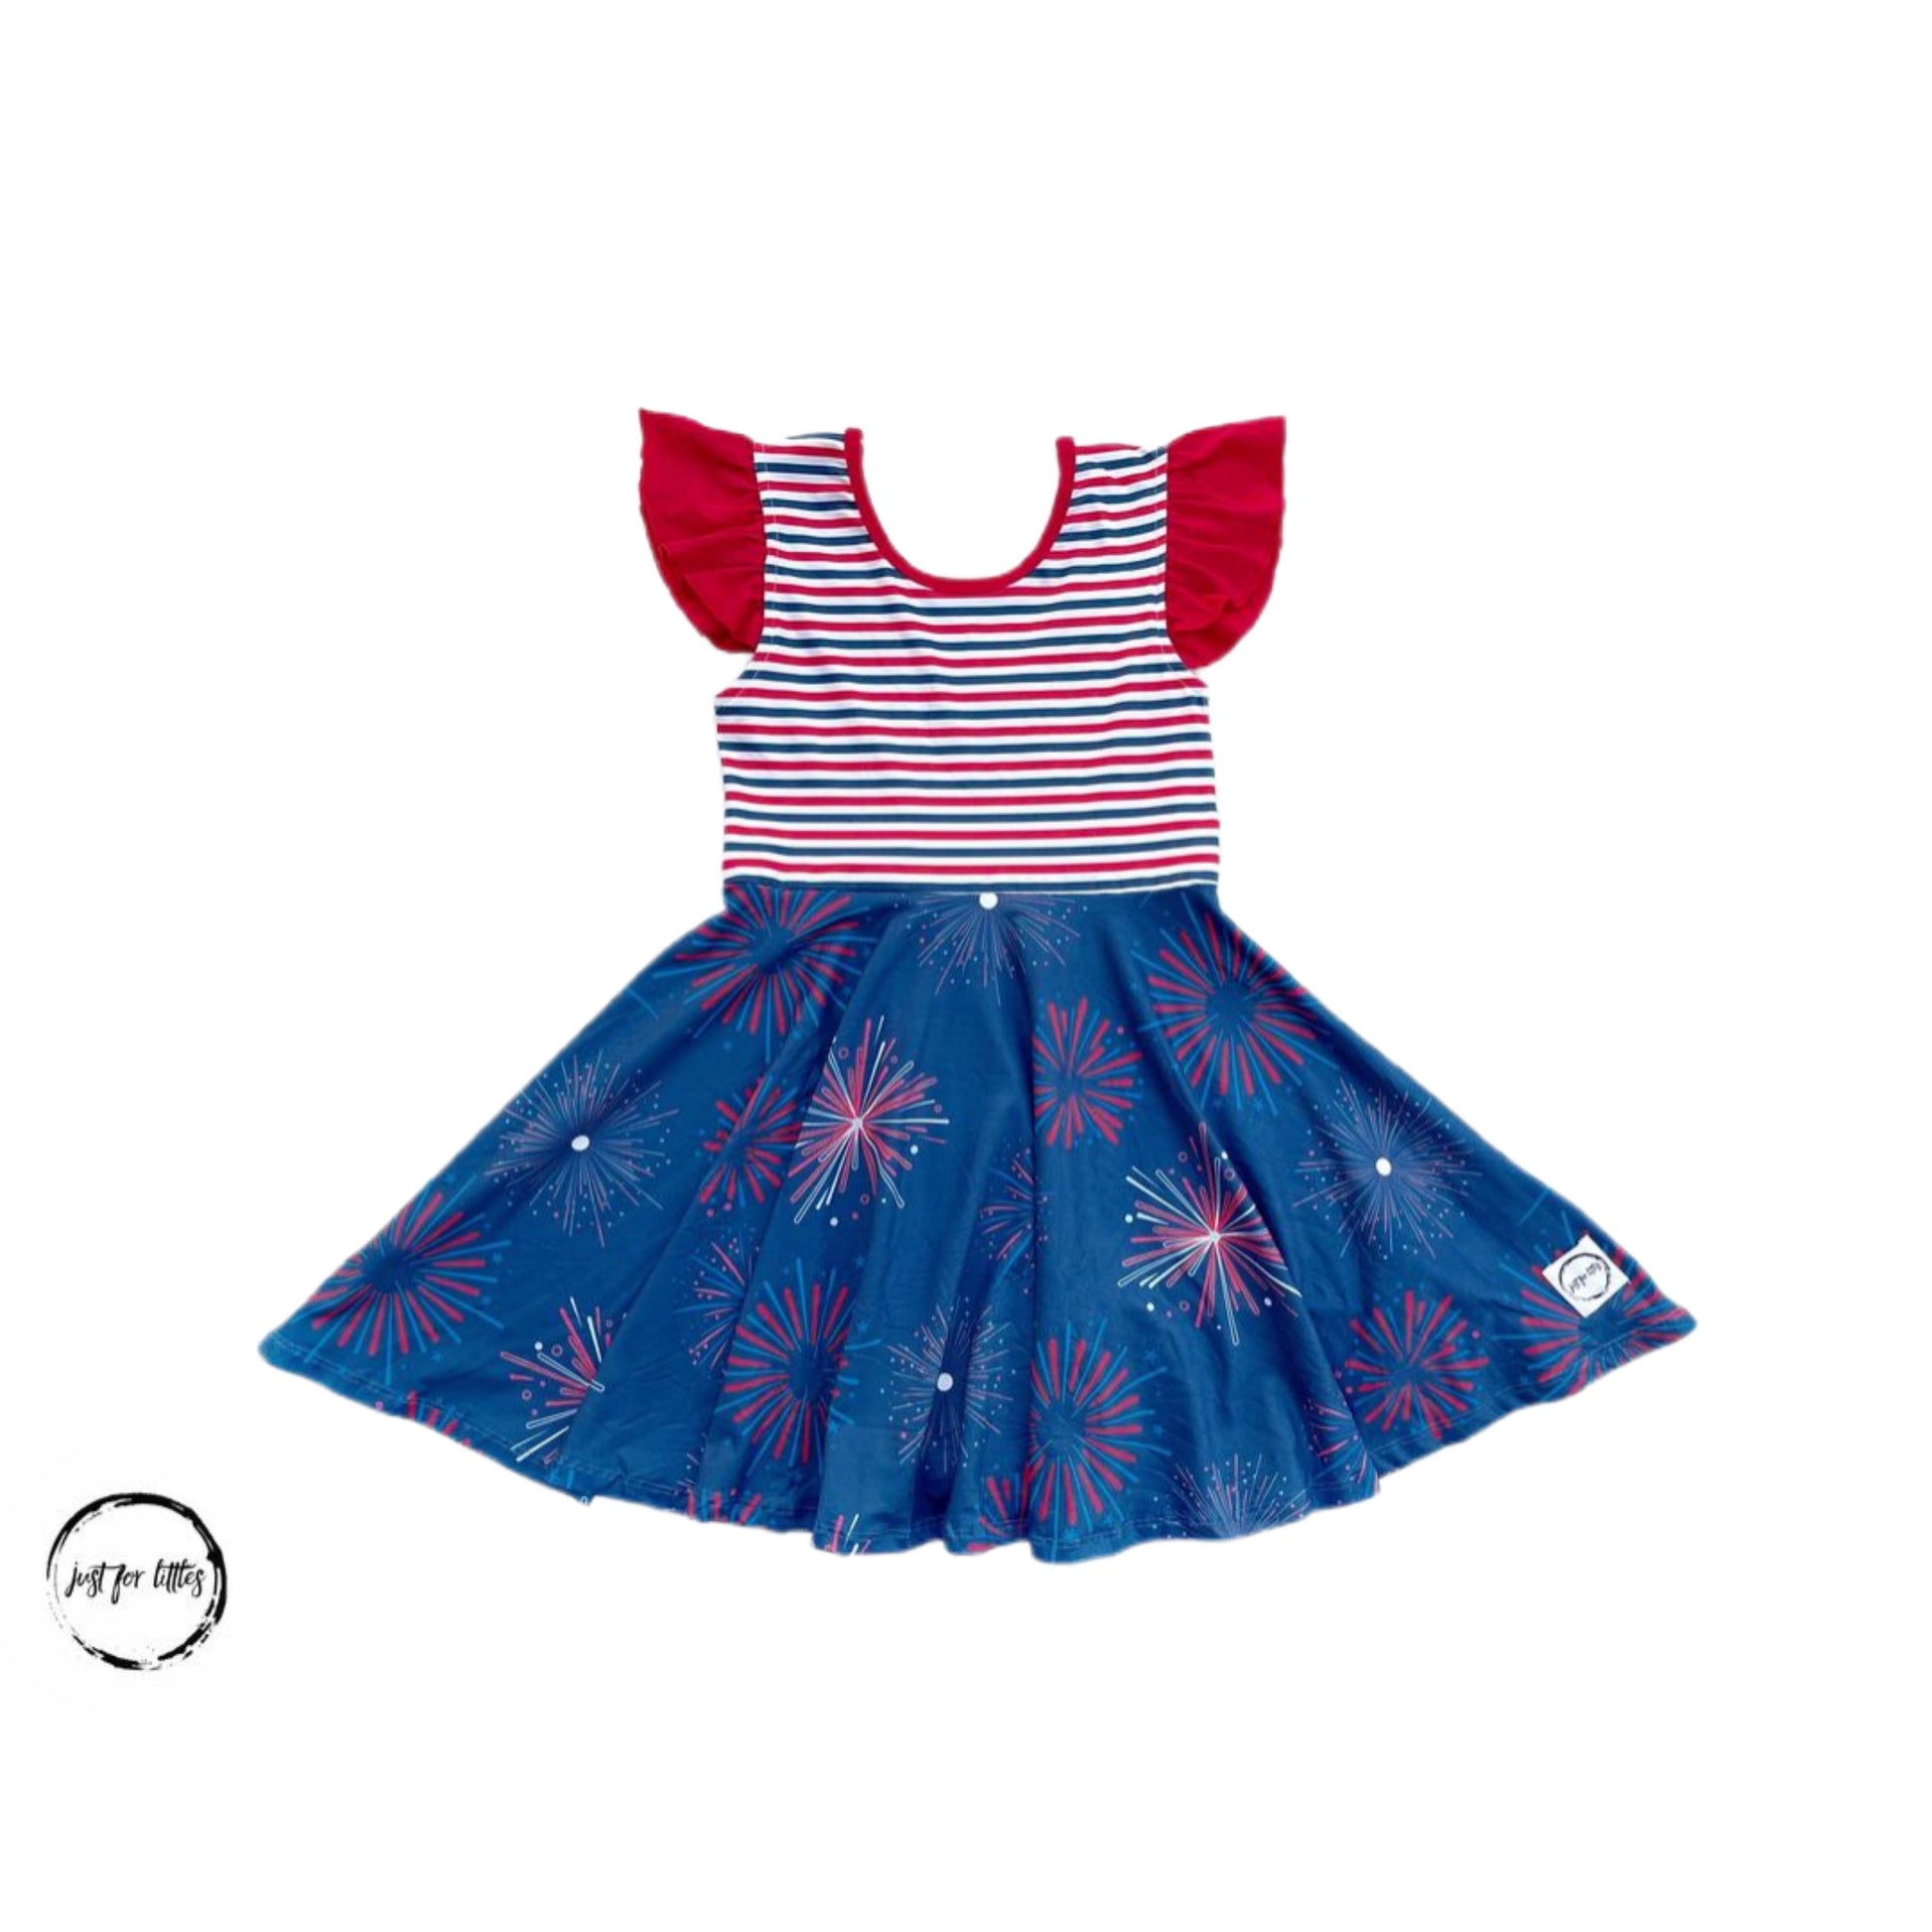 Fireworks Twirl Dress by Just For Littles